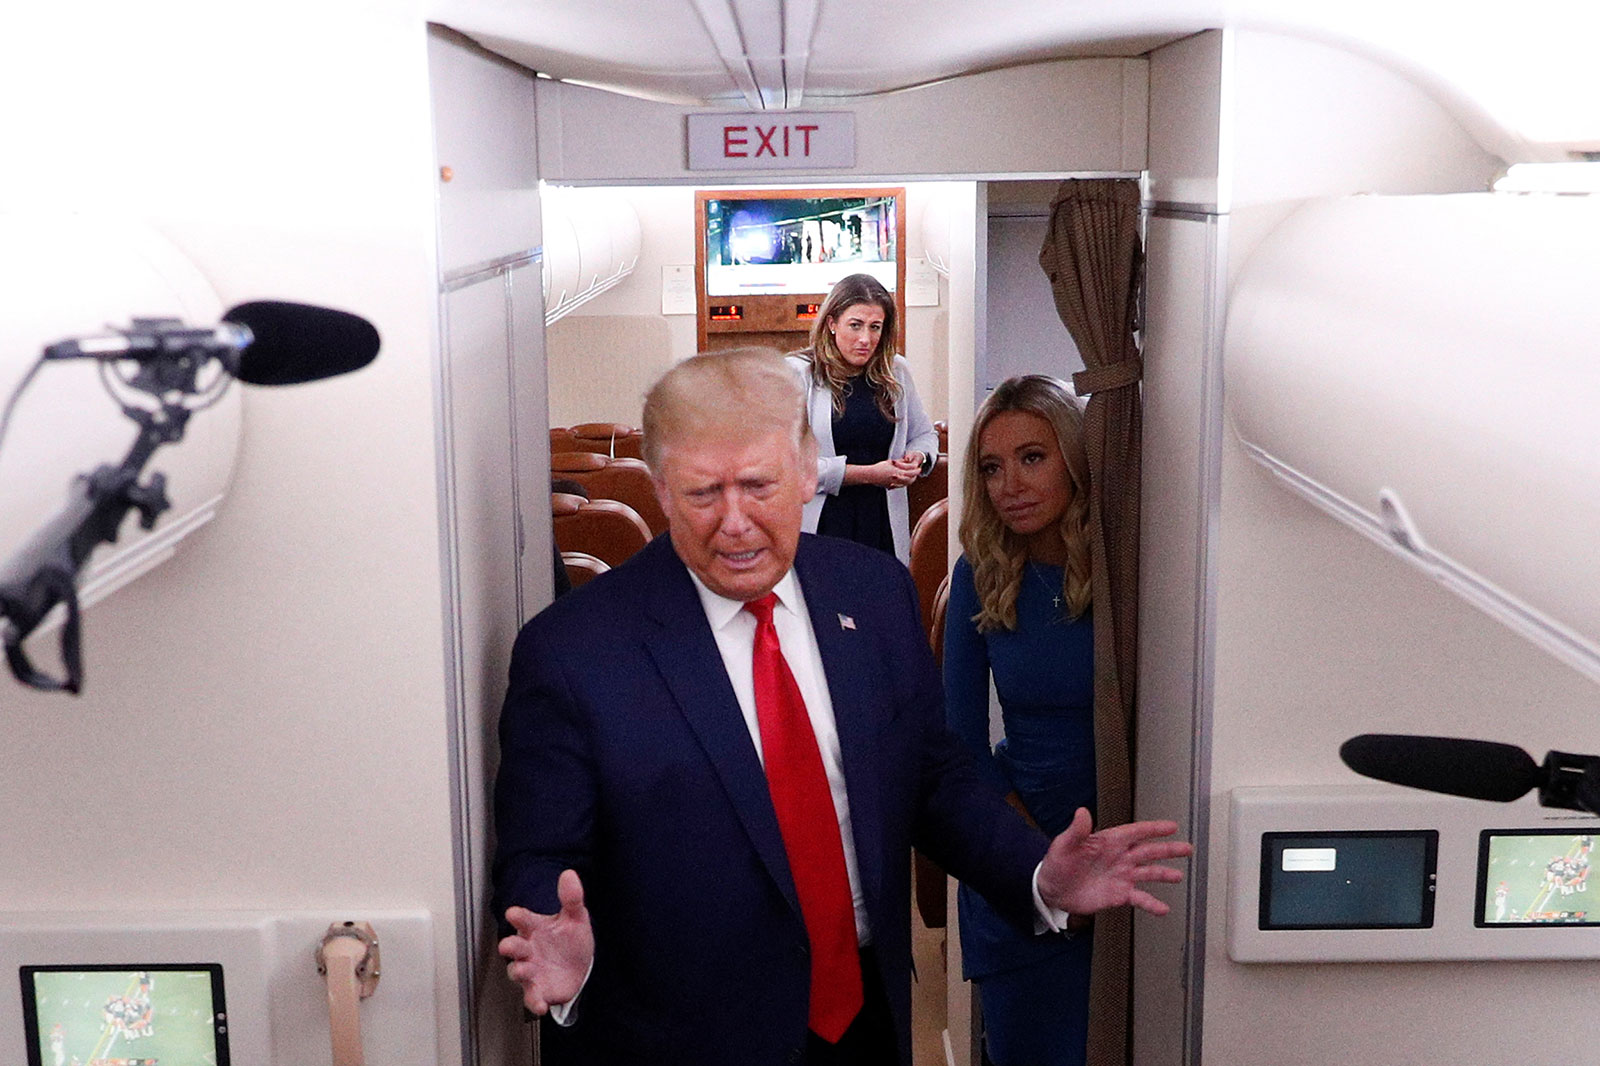 Cassidy Hutchinson, center, and then-White House press secretary Kayleigh McEnany watch then-President Trump speak to journalists aboard Air Force One in September 2020.